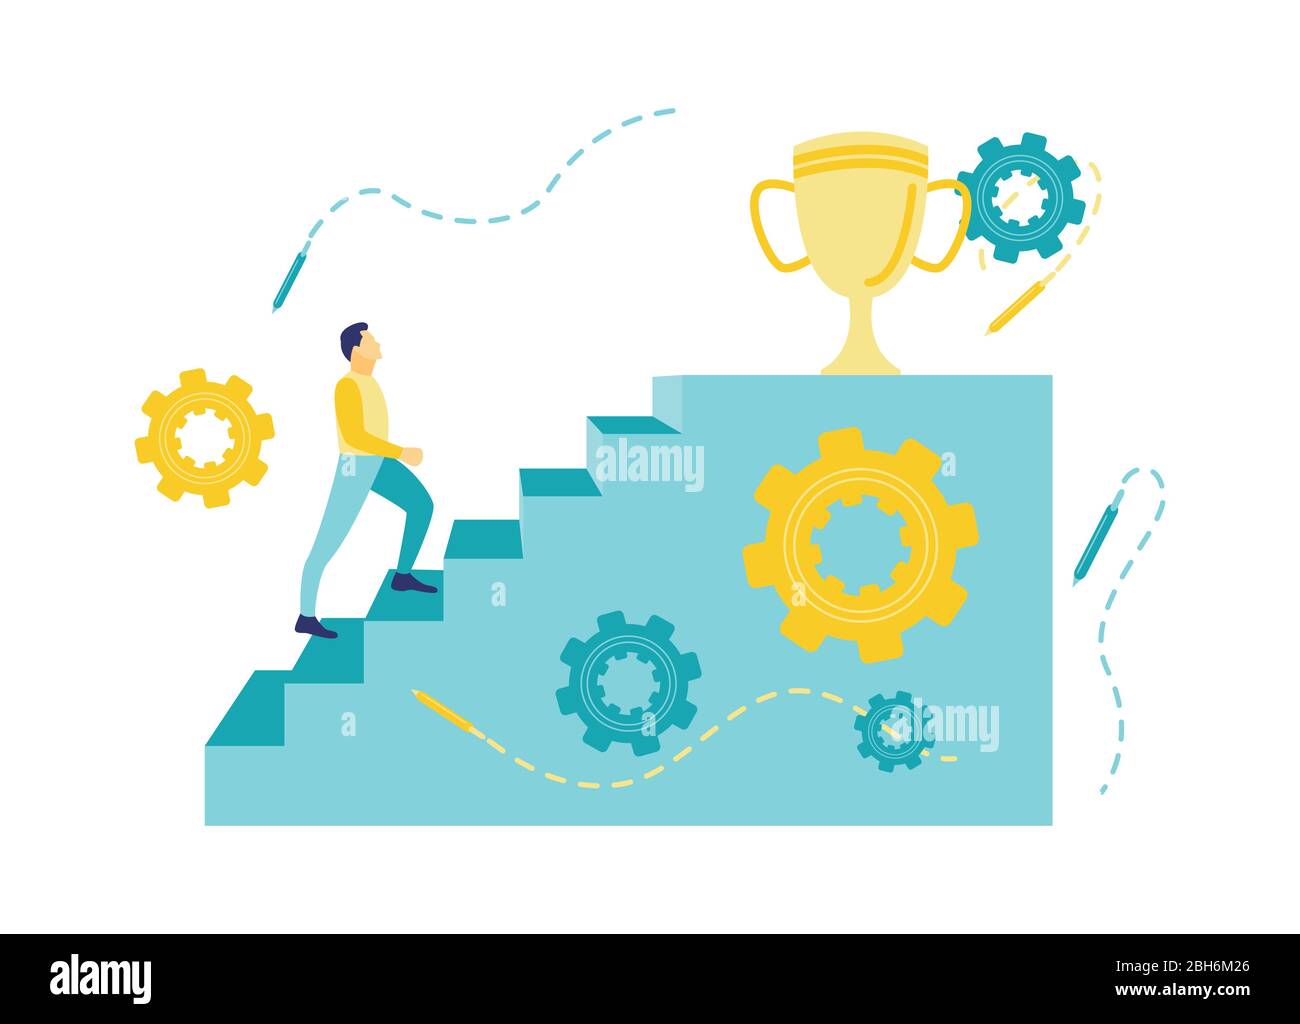 Flat vector illustration of a business concept, man walking on the stairs to success with the trophy symbol. Stock Vector